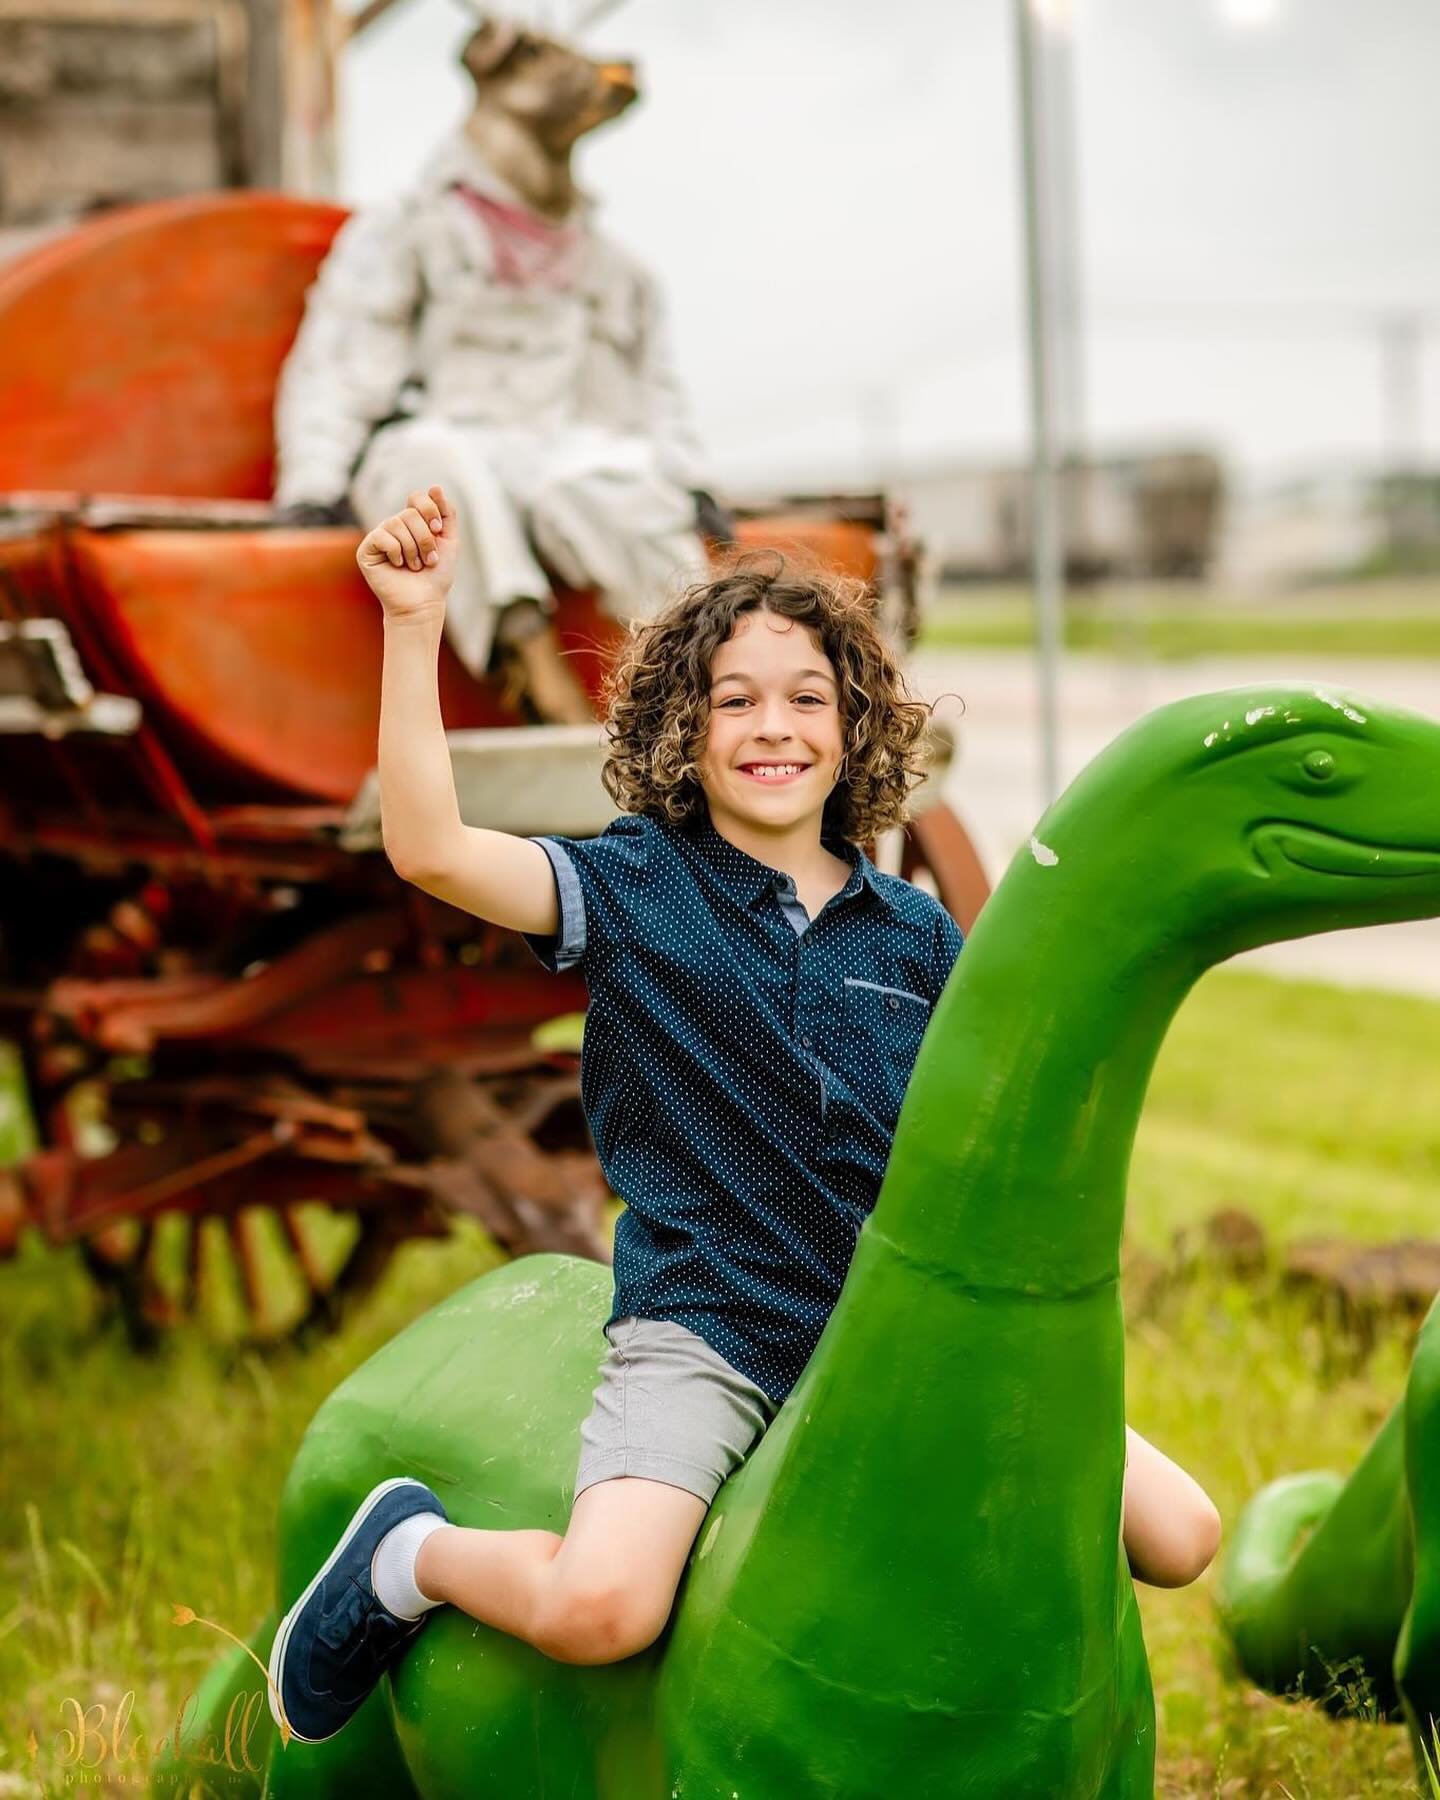 I mean... if you aren&rsquo;t riding a green brontosaurus in front of a stagecoach driving buck with a train rolling by AND eating a cookie covered in powdered sugar is it really even a birthday photoshoot?!! Happy (early) Birthday Asher!!!
&zwnj;
&c